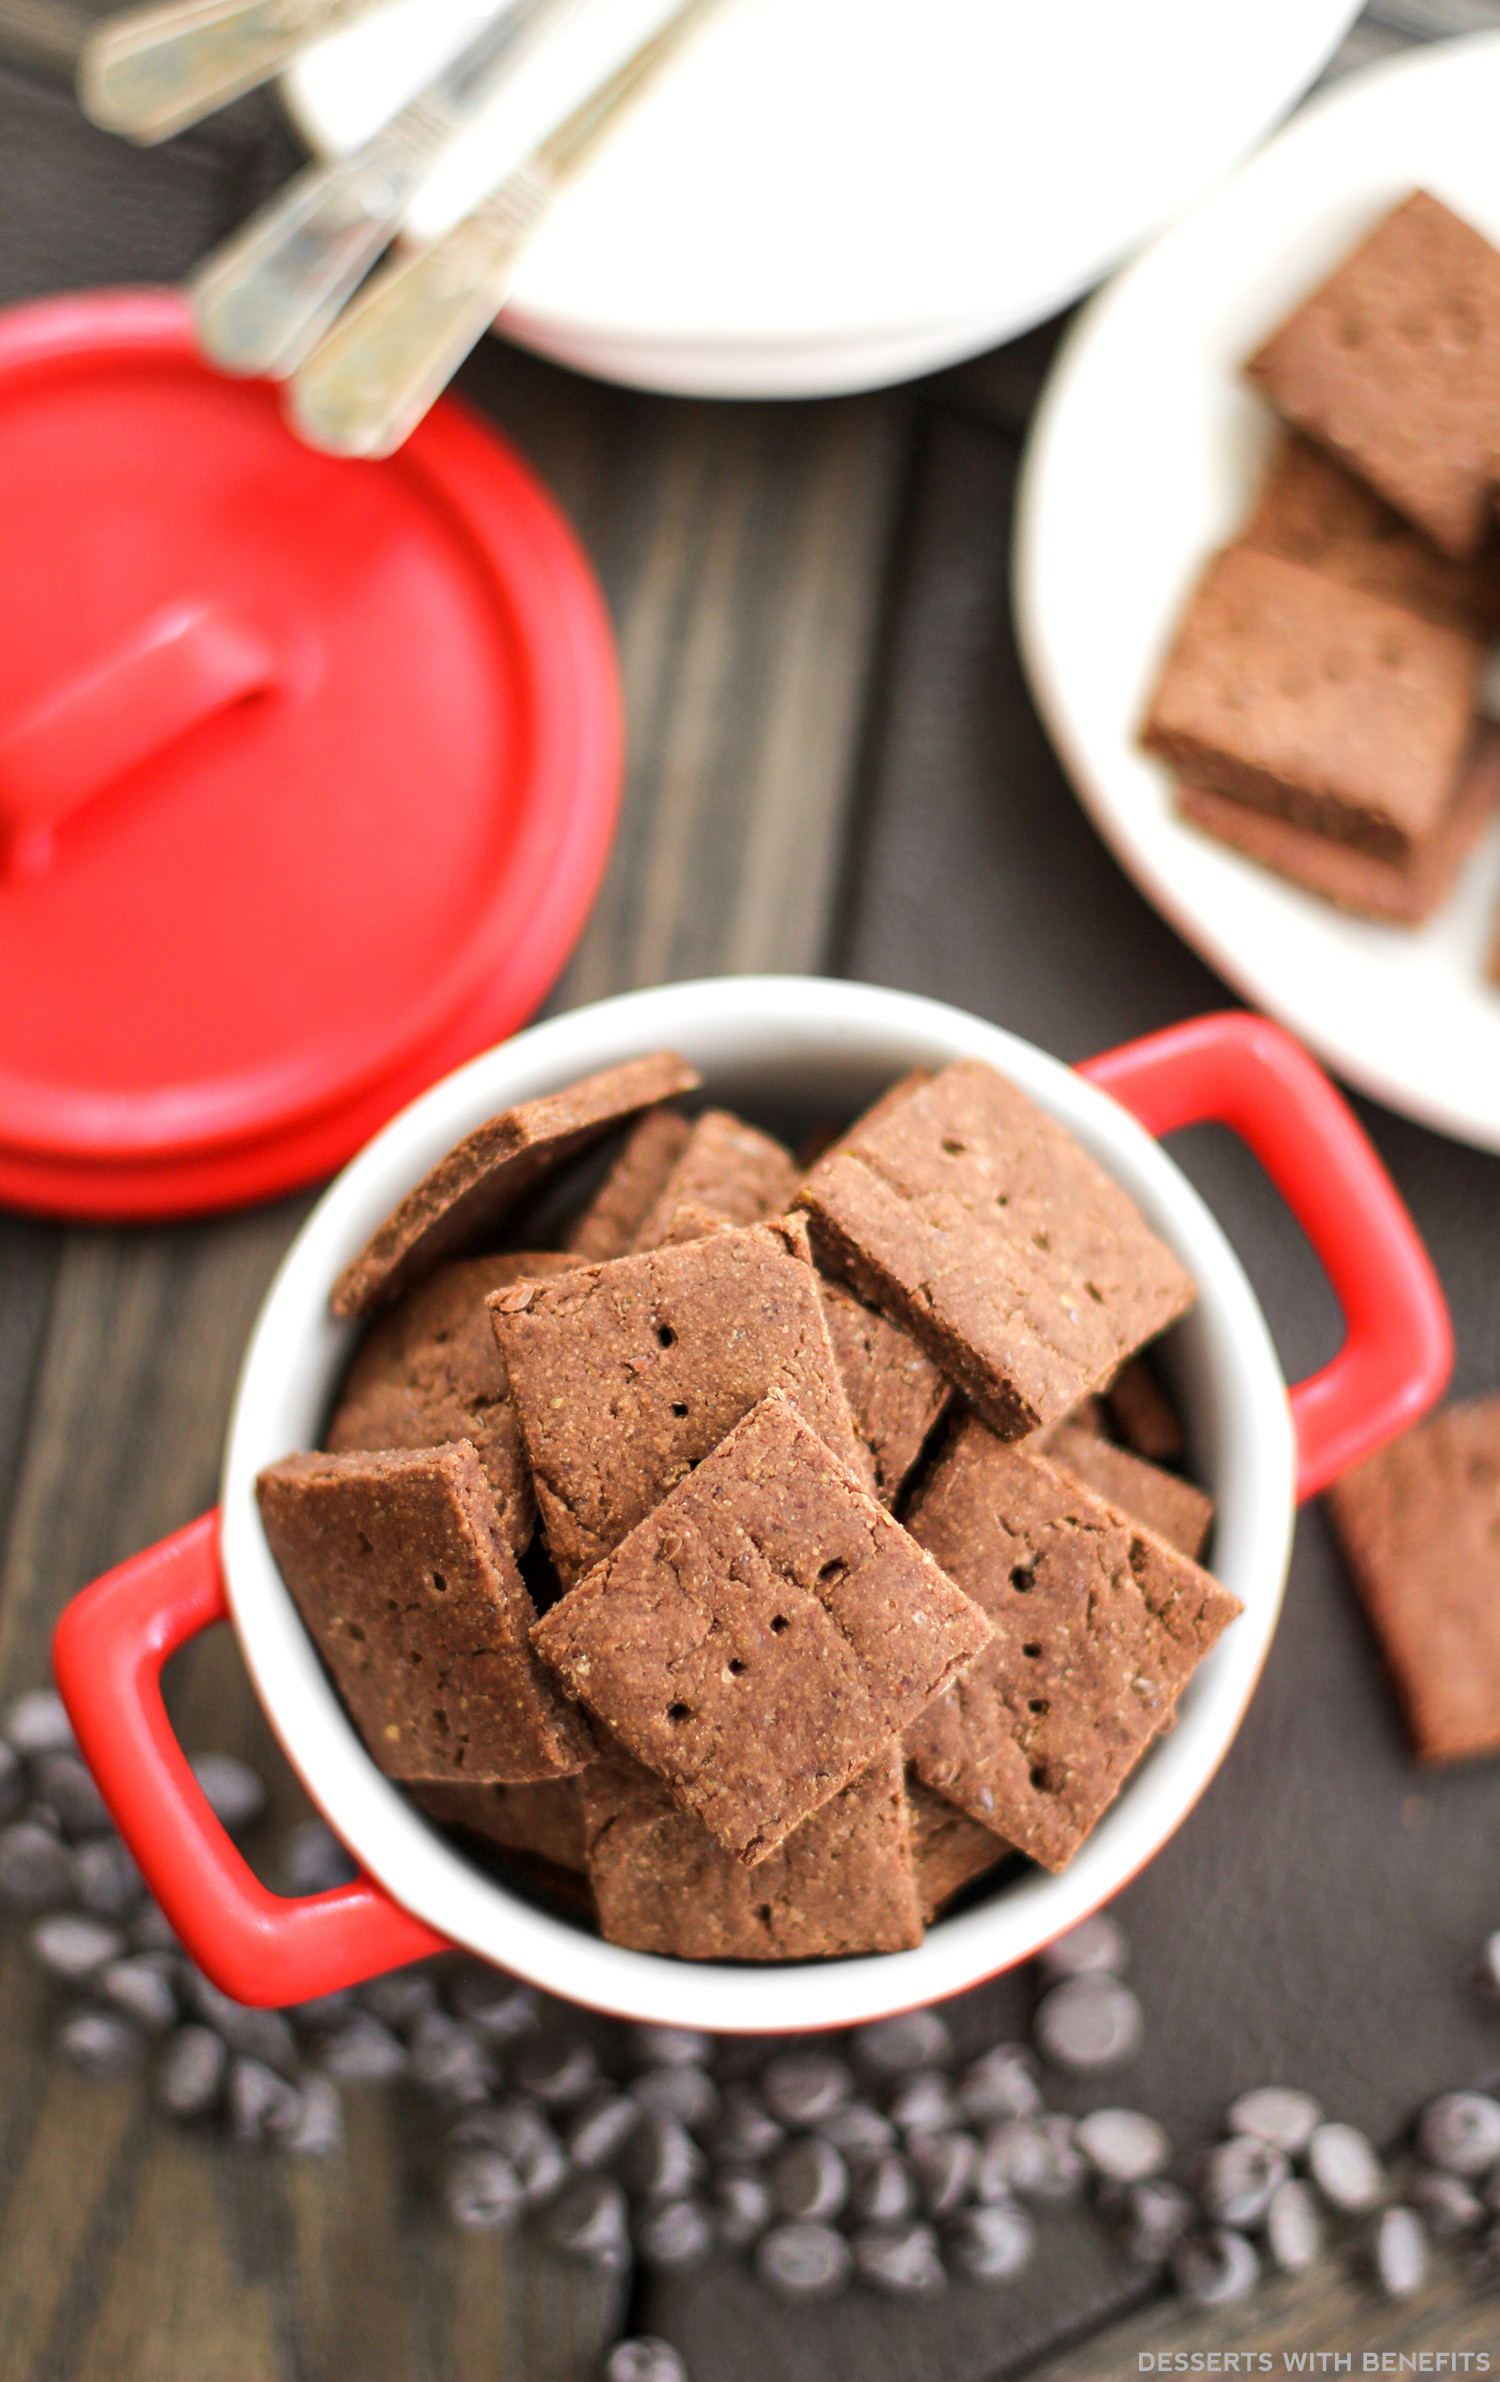 High Fiber Desserts
 Desserts With Benefits Healthy Chocolate Flax Crackers